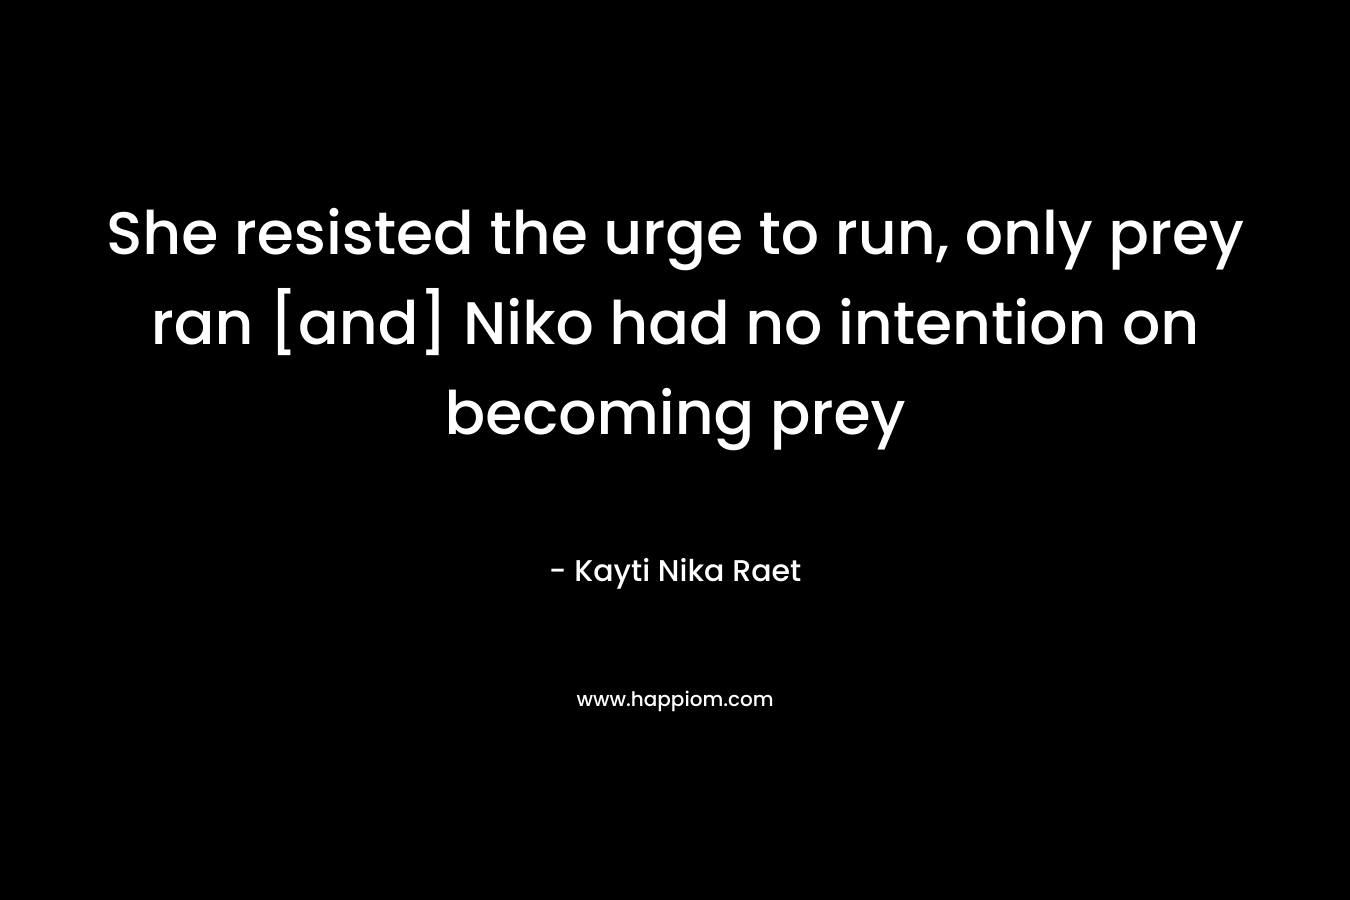 She resisted the urge to run, only prey ran [and] Niko had no intention on becoming prey